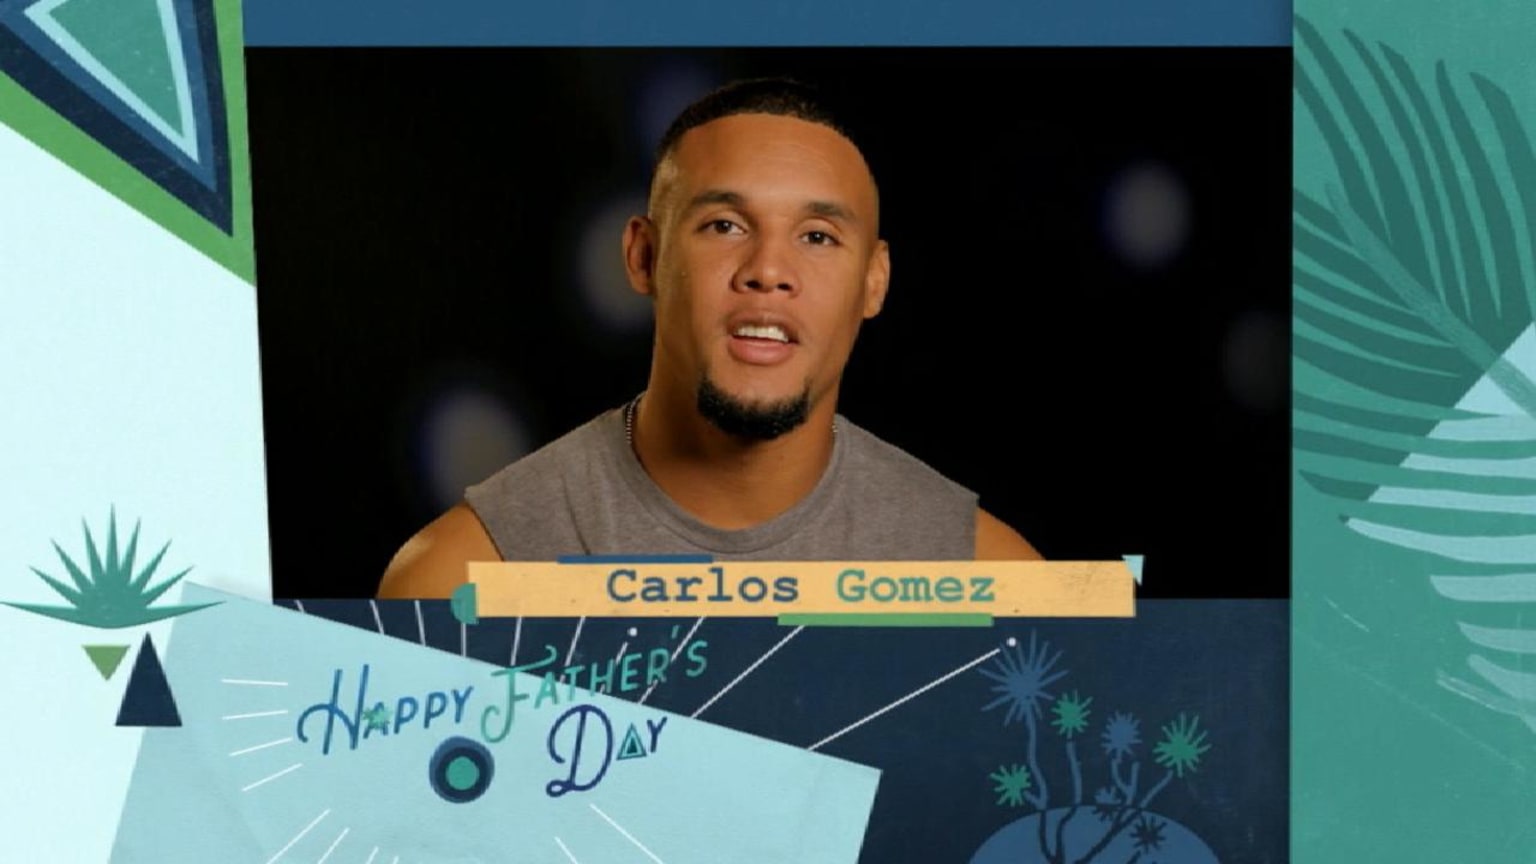 Rays wish a happy Father's Day, 06/17/2018